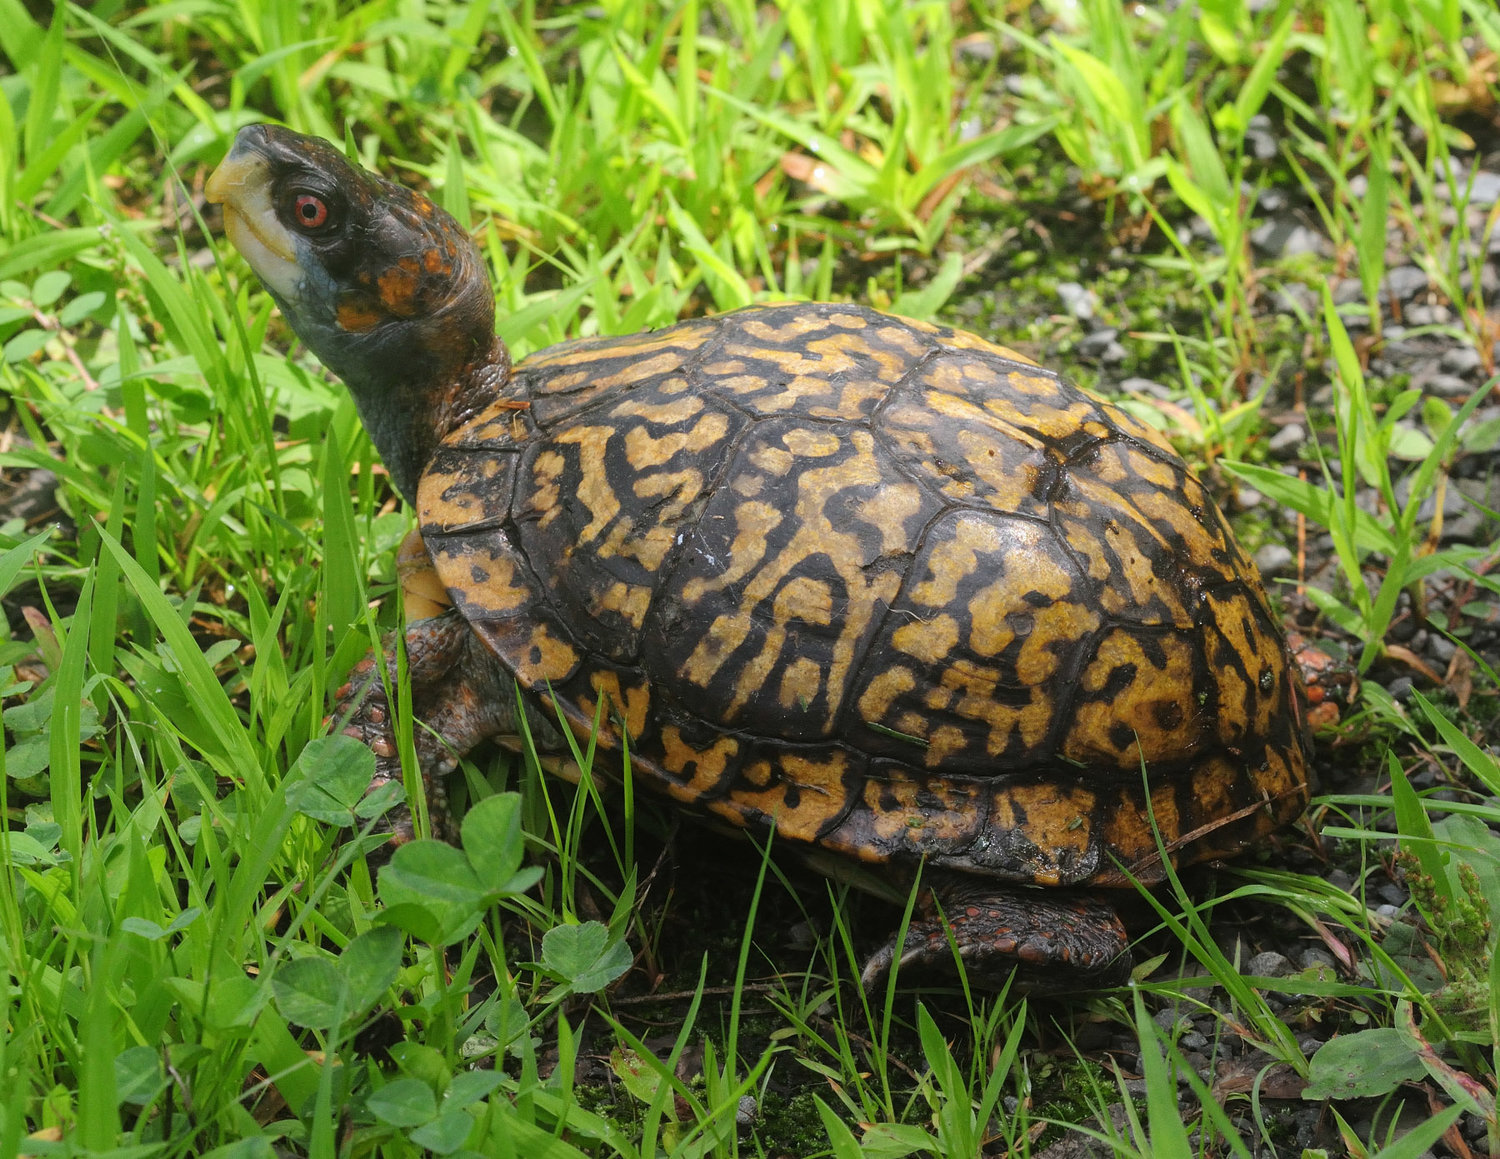 Box turtles are usually about eight inches long when grown. In addition to the orange markings, males have orange eyes while females have yellowish-brown eyes. They can be found in woodlands or fields and are omnivorous; they eat a wide variety of insects, amphibians and plants.